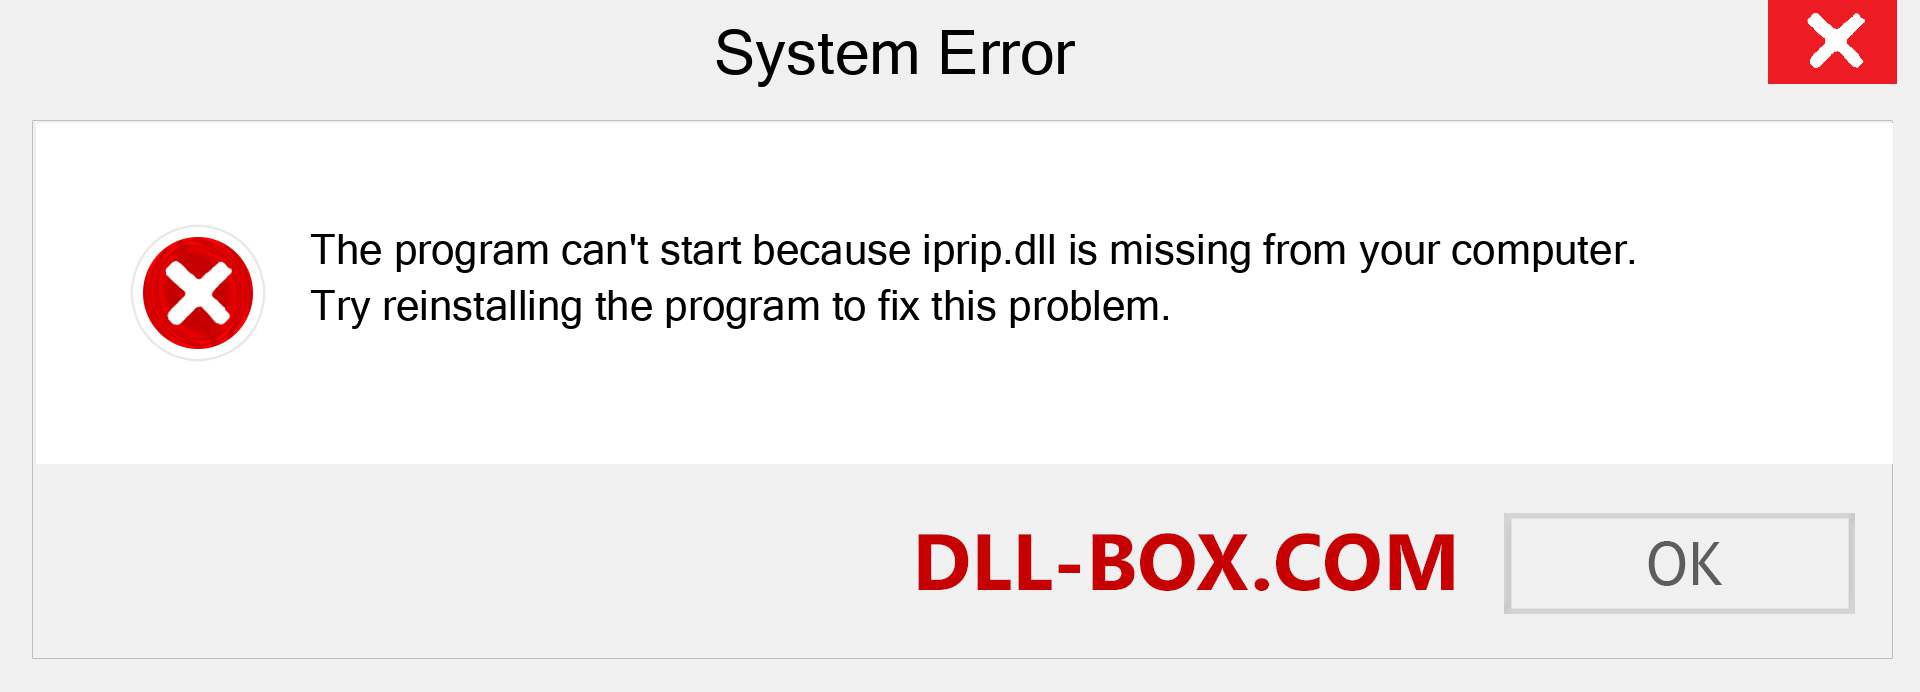  iprip.dll file is missing?. Download for Windows 7, 8, 10 - Fix  iprip dll Missing Error on Windows, photos, images